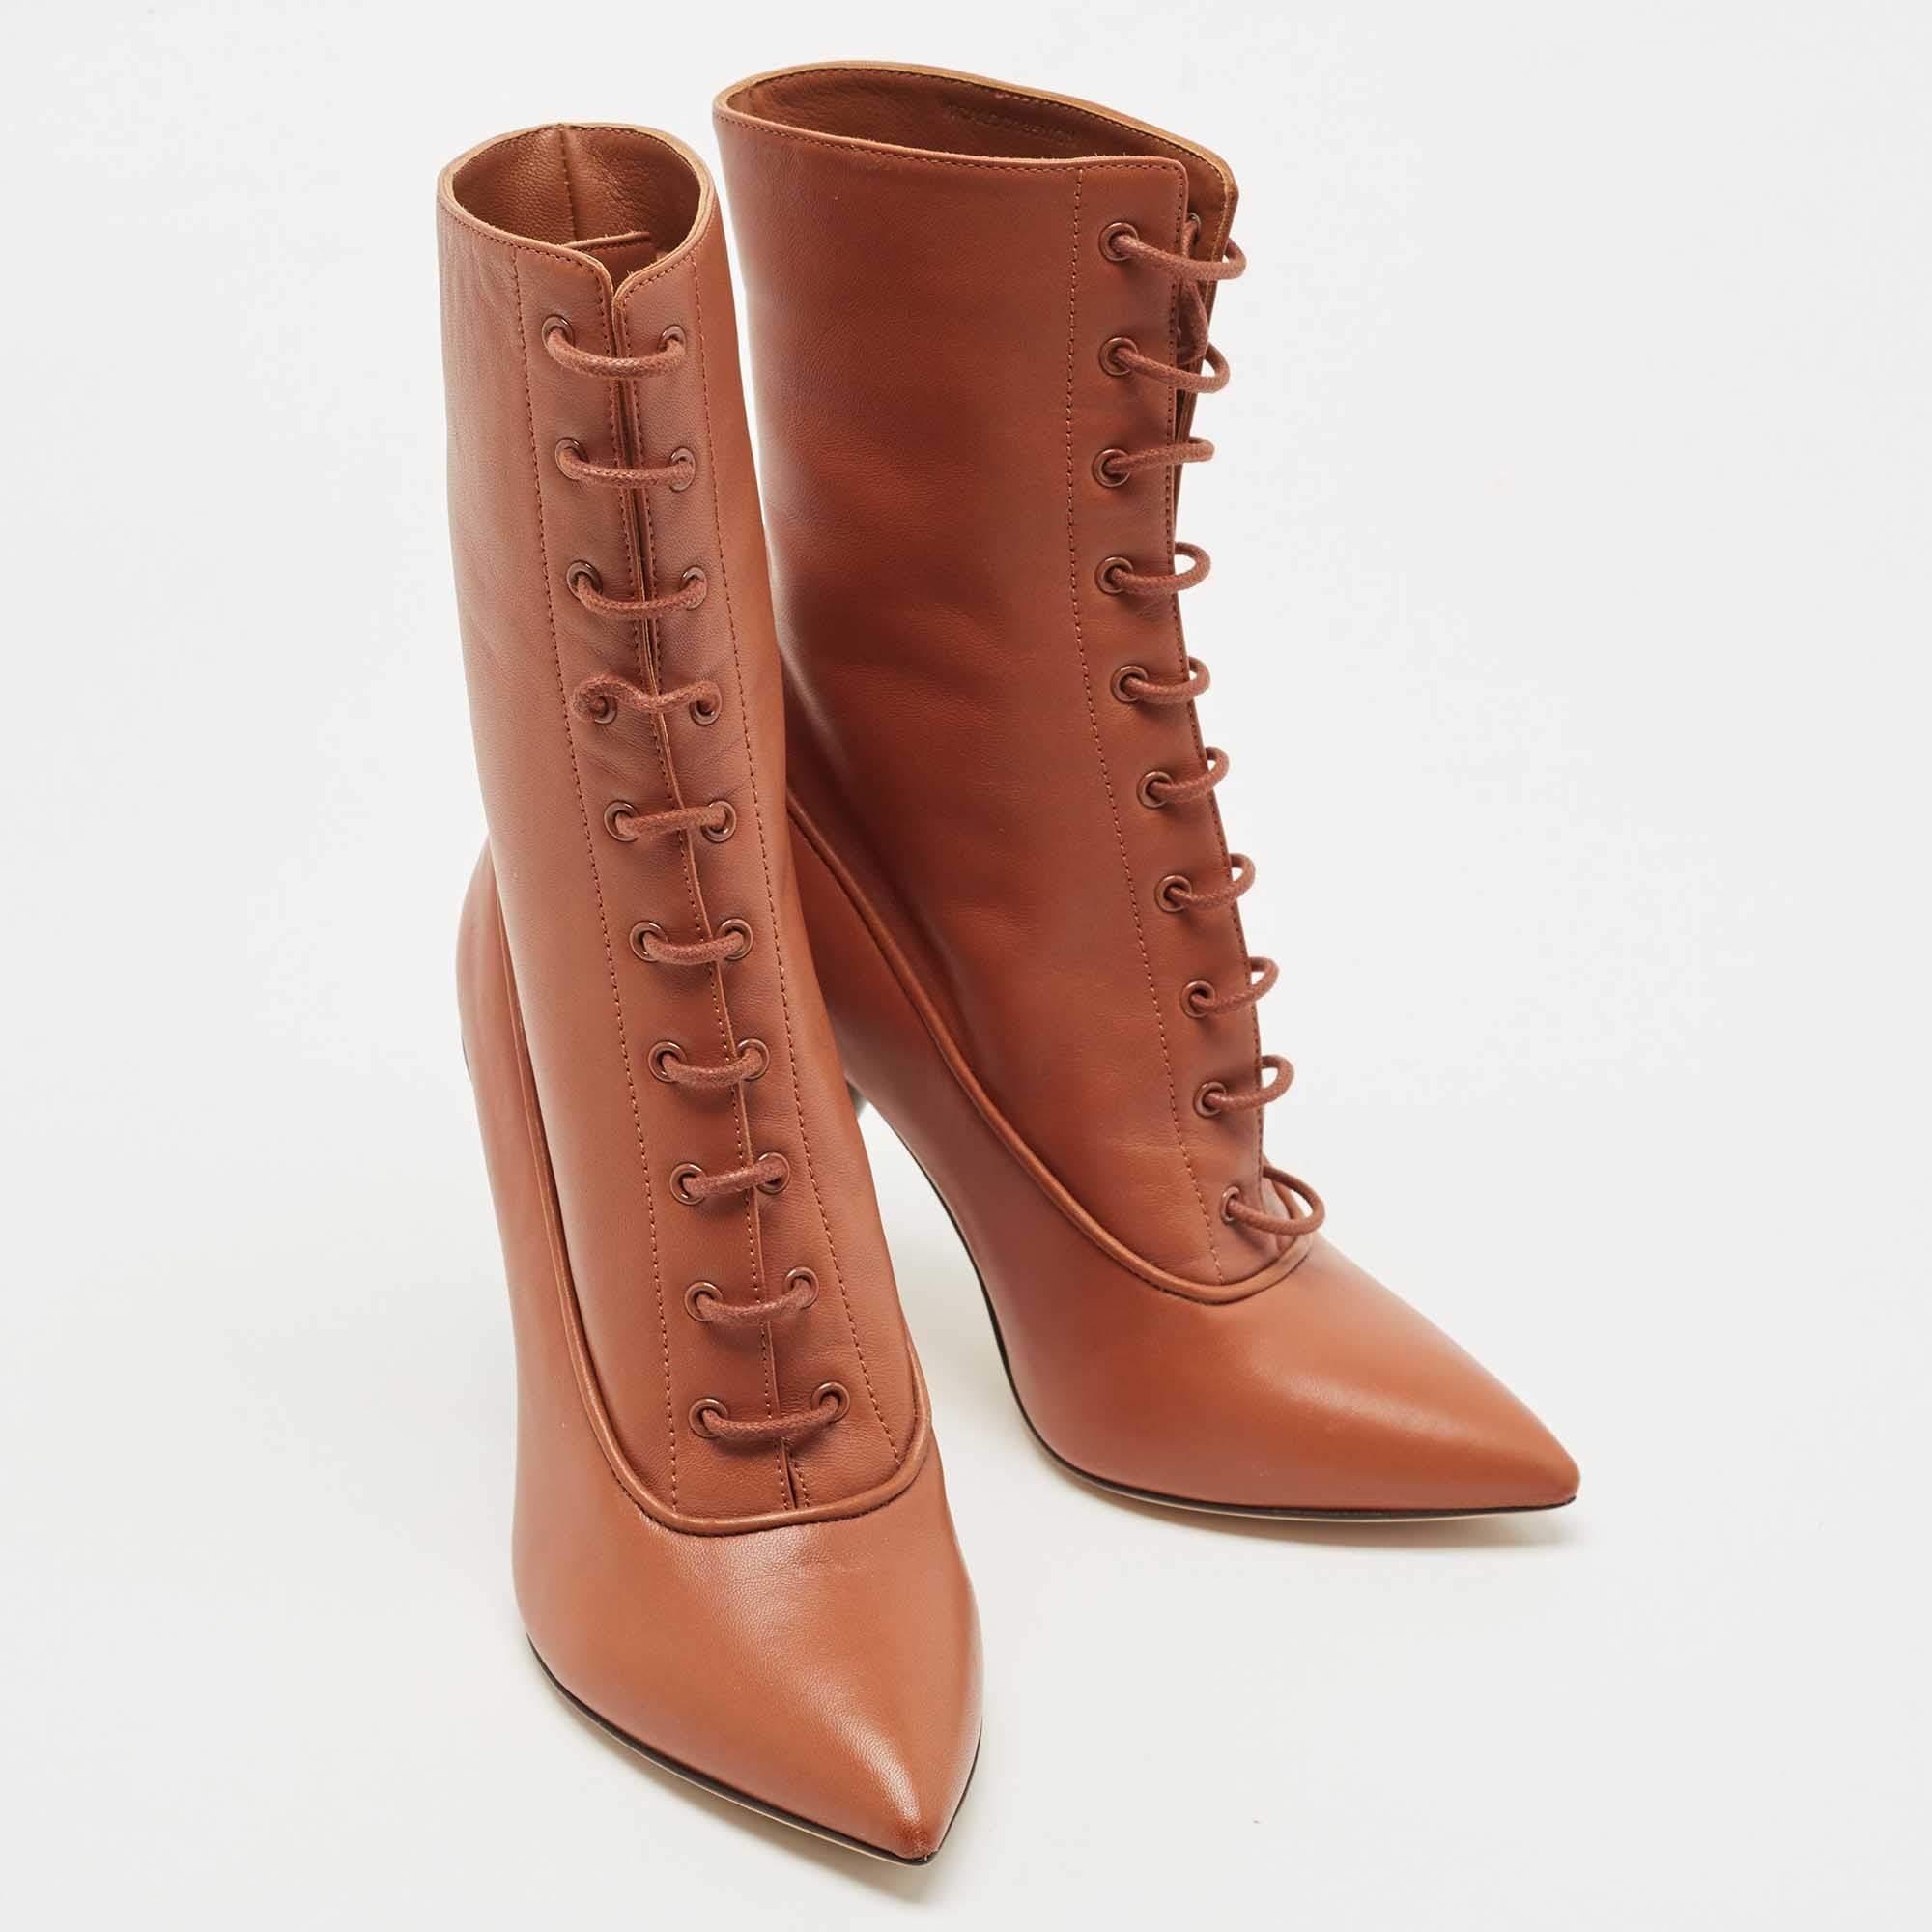 Burberry Brown Leather Mid Calf Boots Size 36 1